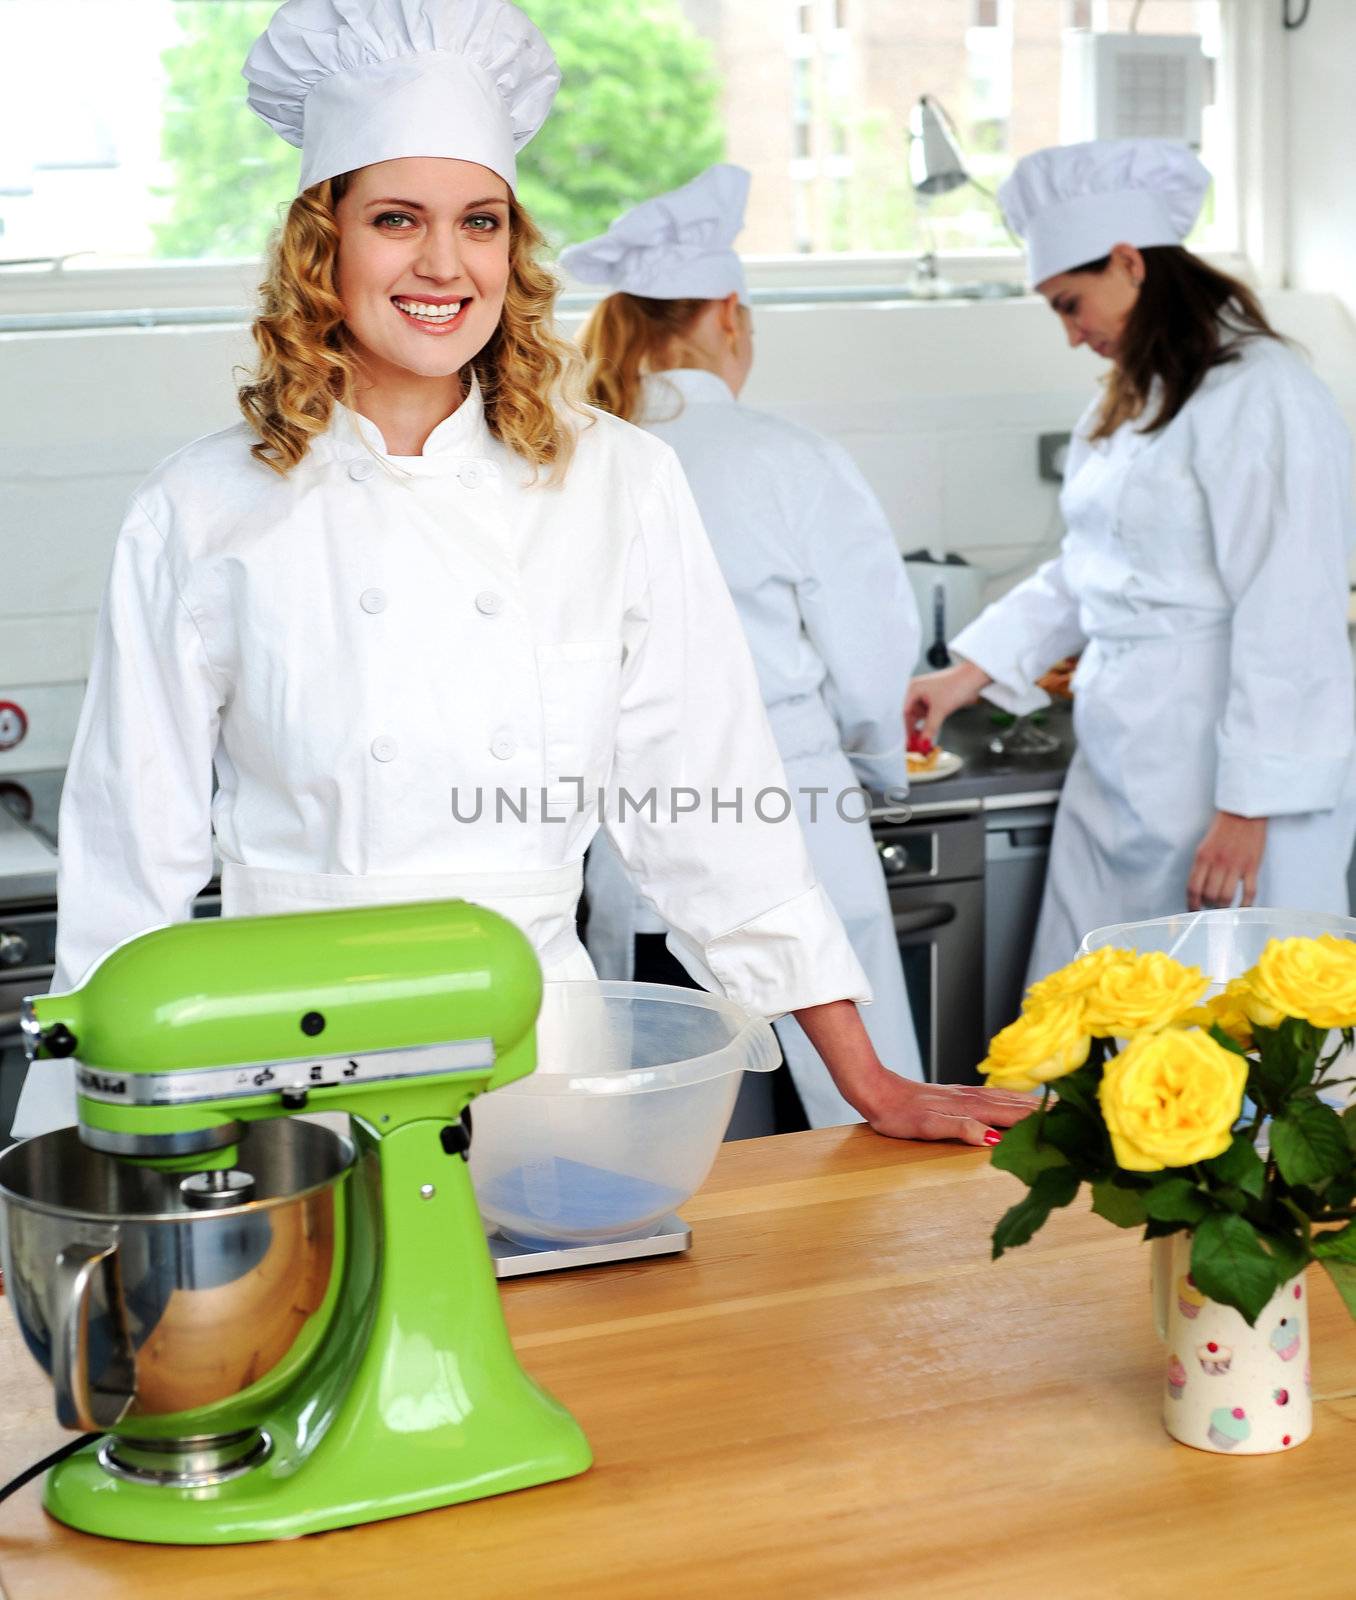 Two chefs working in background while third chef in focus looking at camera and smiling